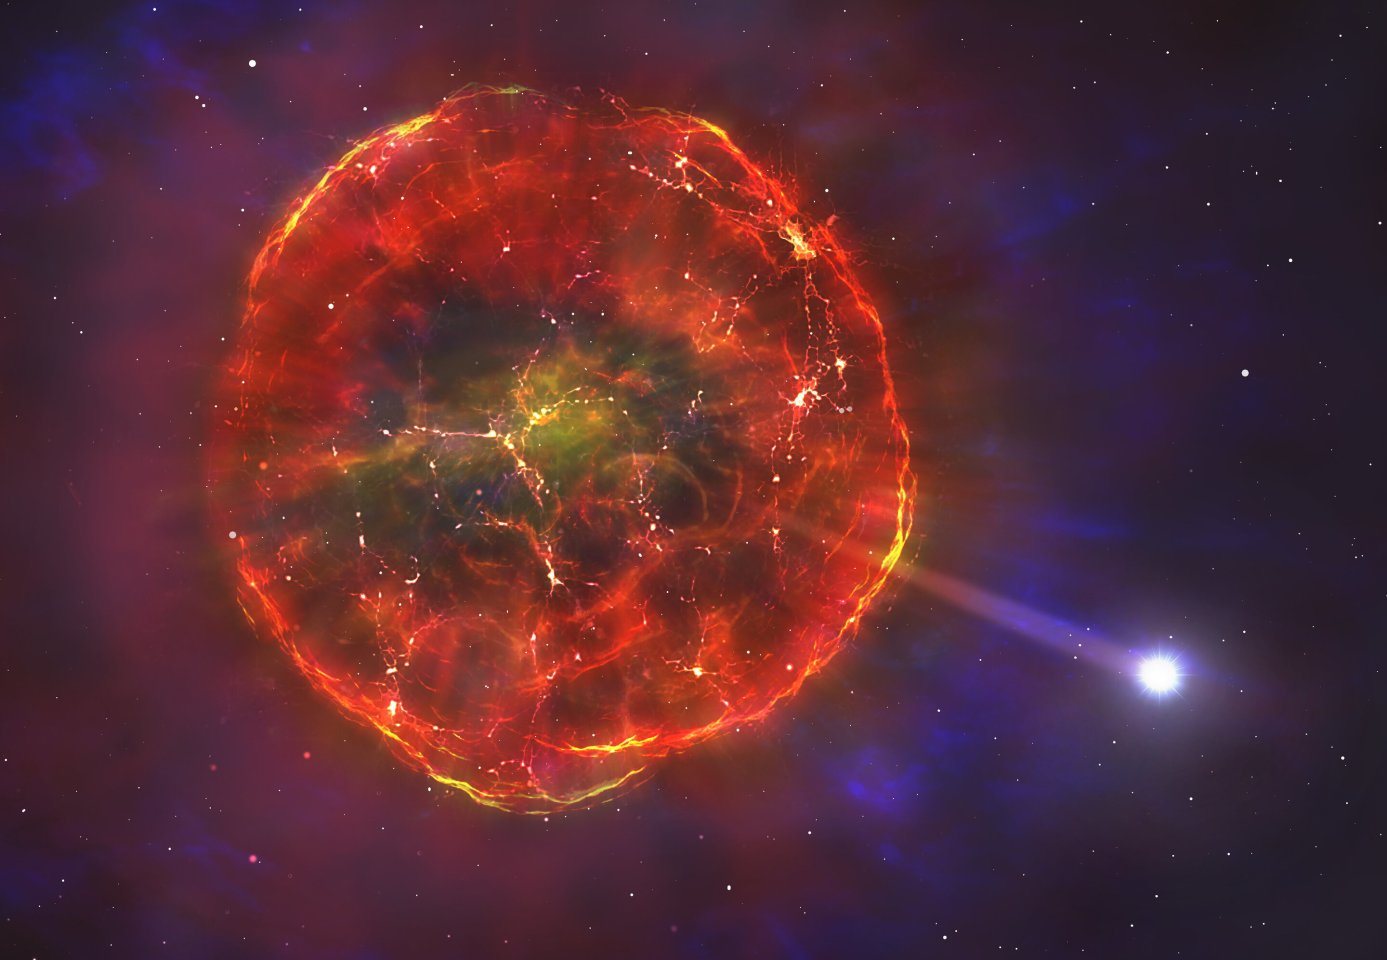 An artist's rendering of a supernova kicking a white dwarf star into high speed, rather than destroying it